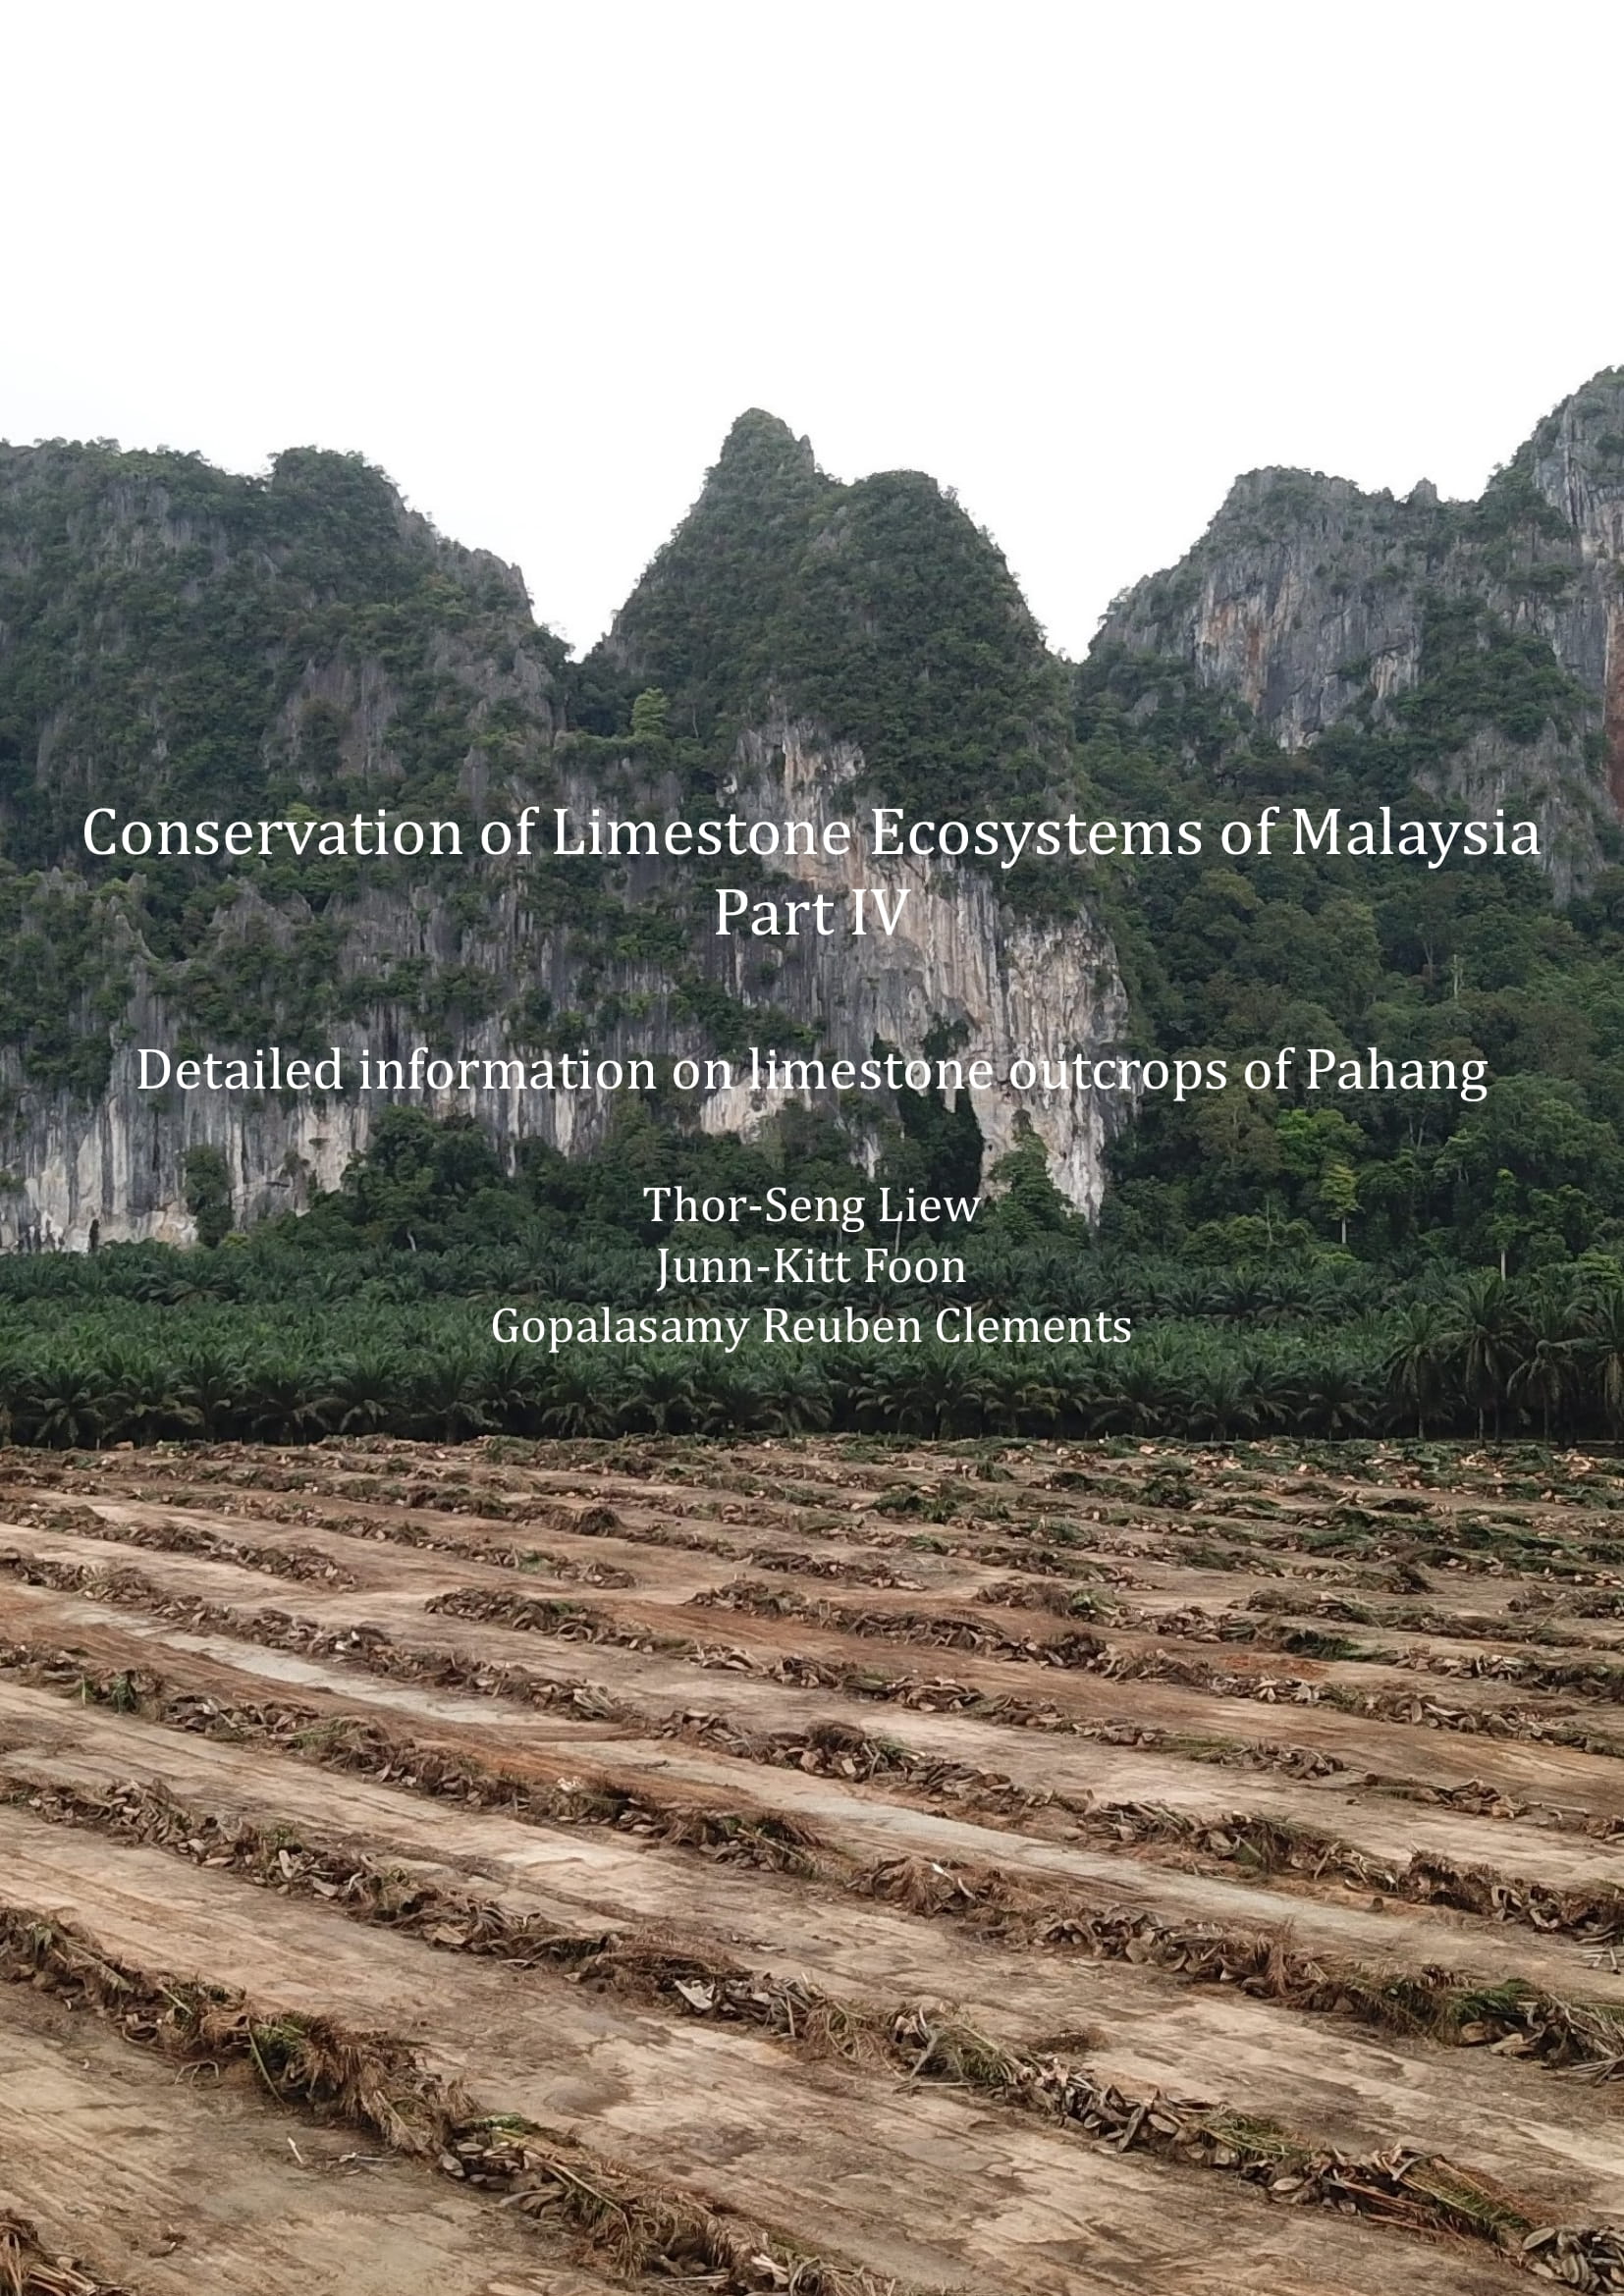 Conservation of Limestone Ecosystems of Malaysia, Part IV, Detailed information on limestone outcrops of Pahang.